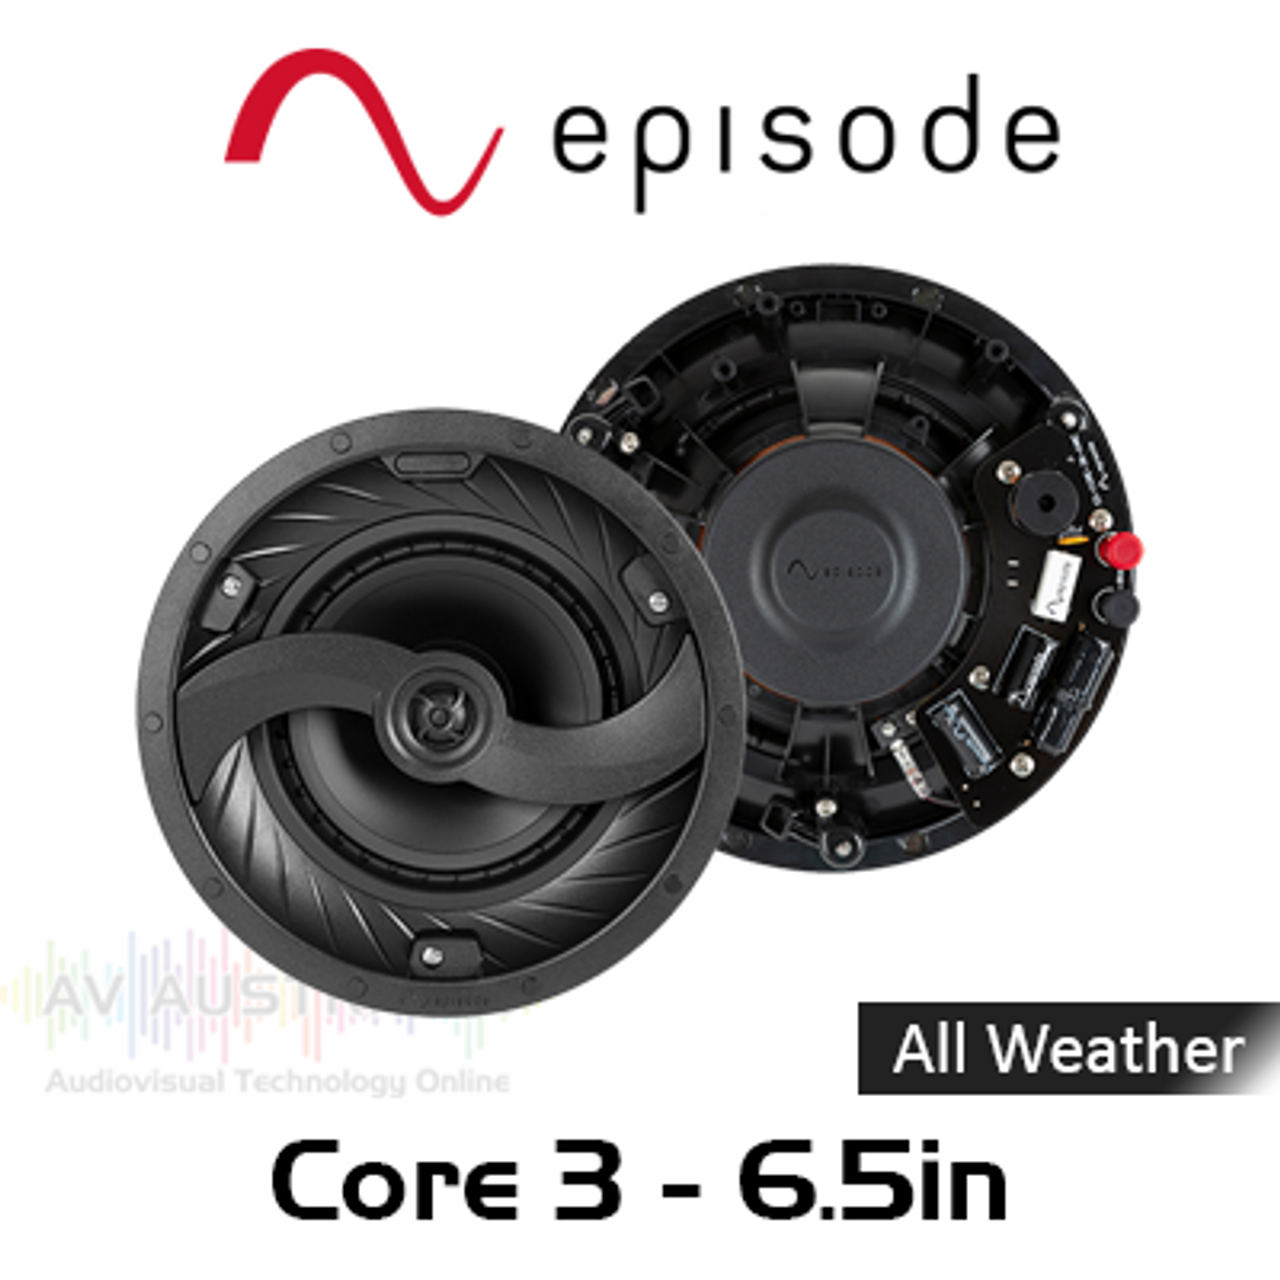 Episode Core 3 Series 6.5" All Weather In-Ceiling Speakers (Pair)